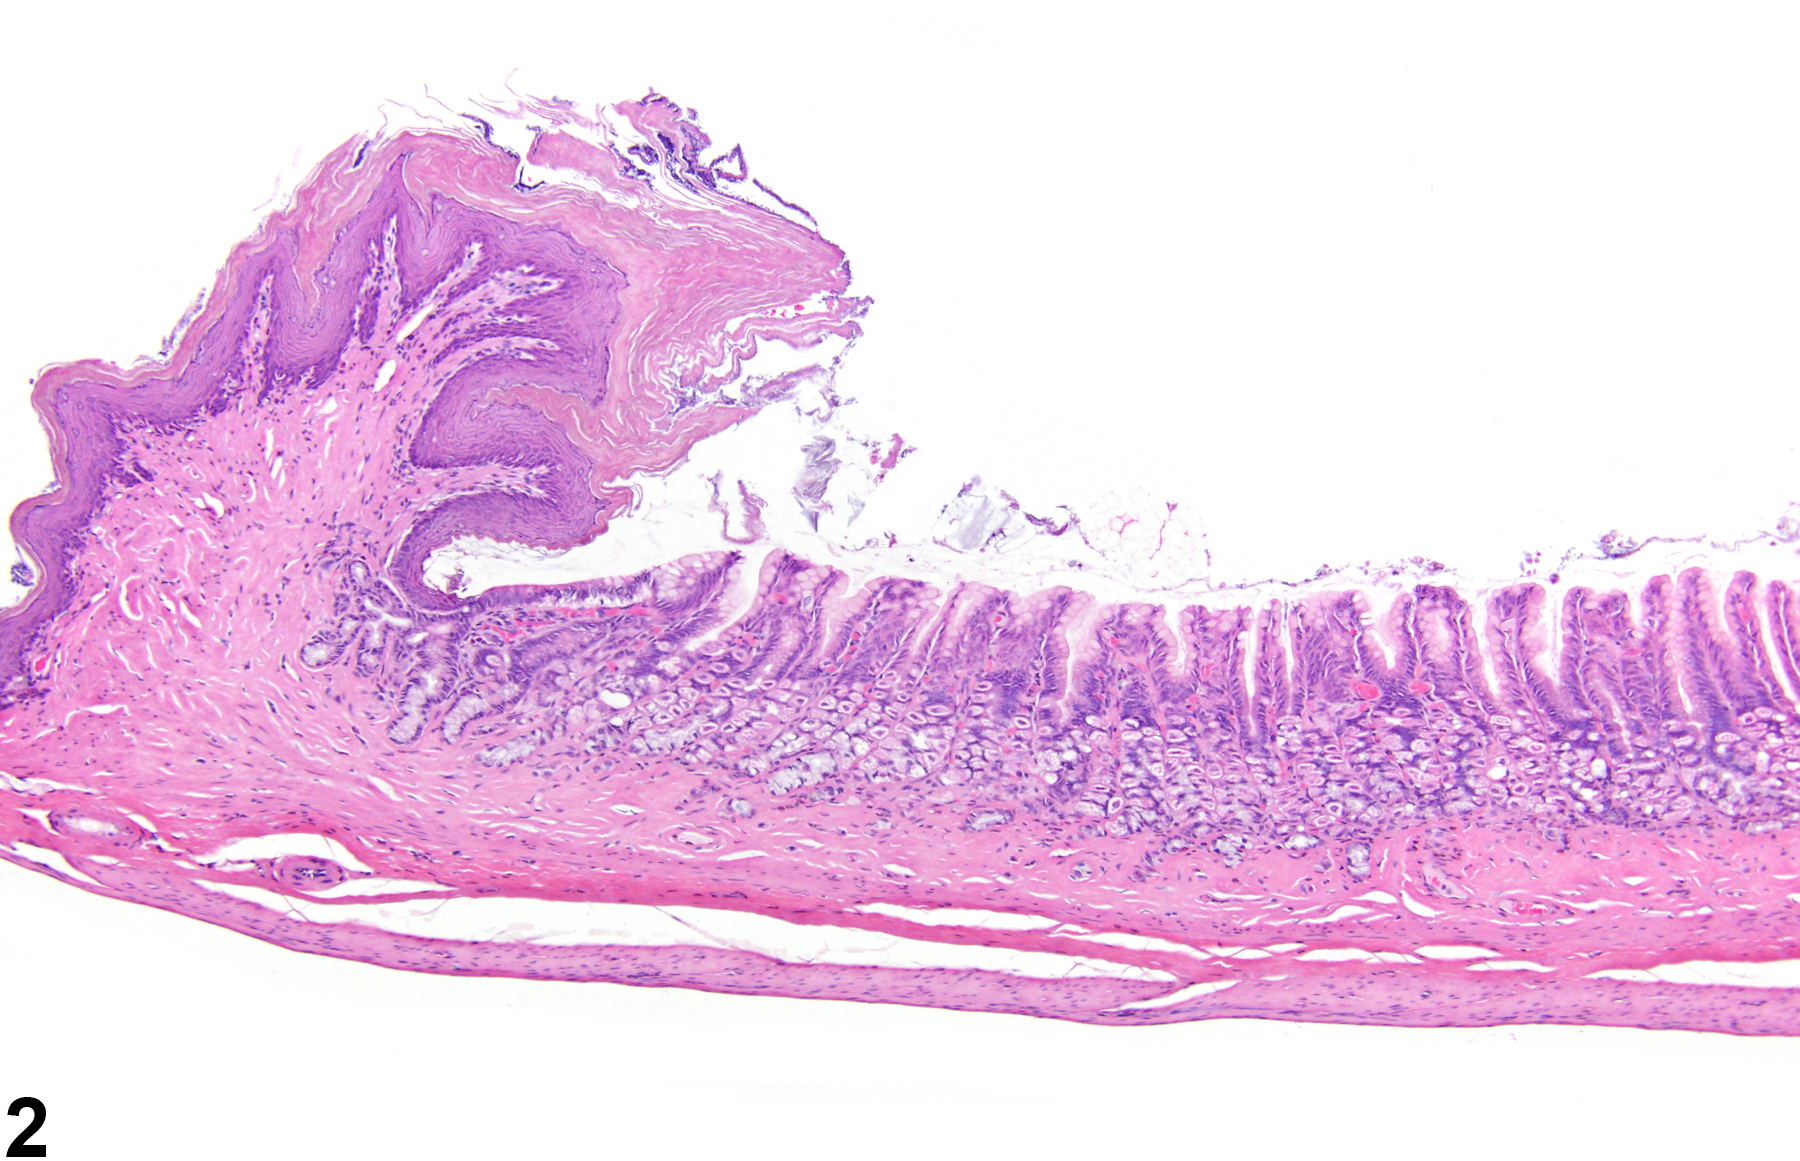 Image of atrophy in the glandular stomach from a female F344/N rat in a chronic study